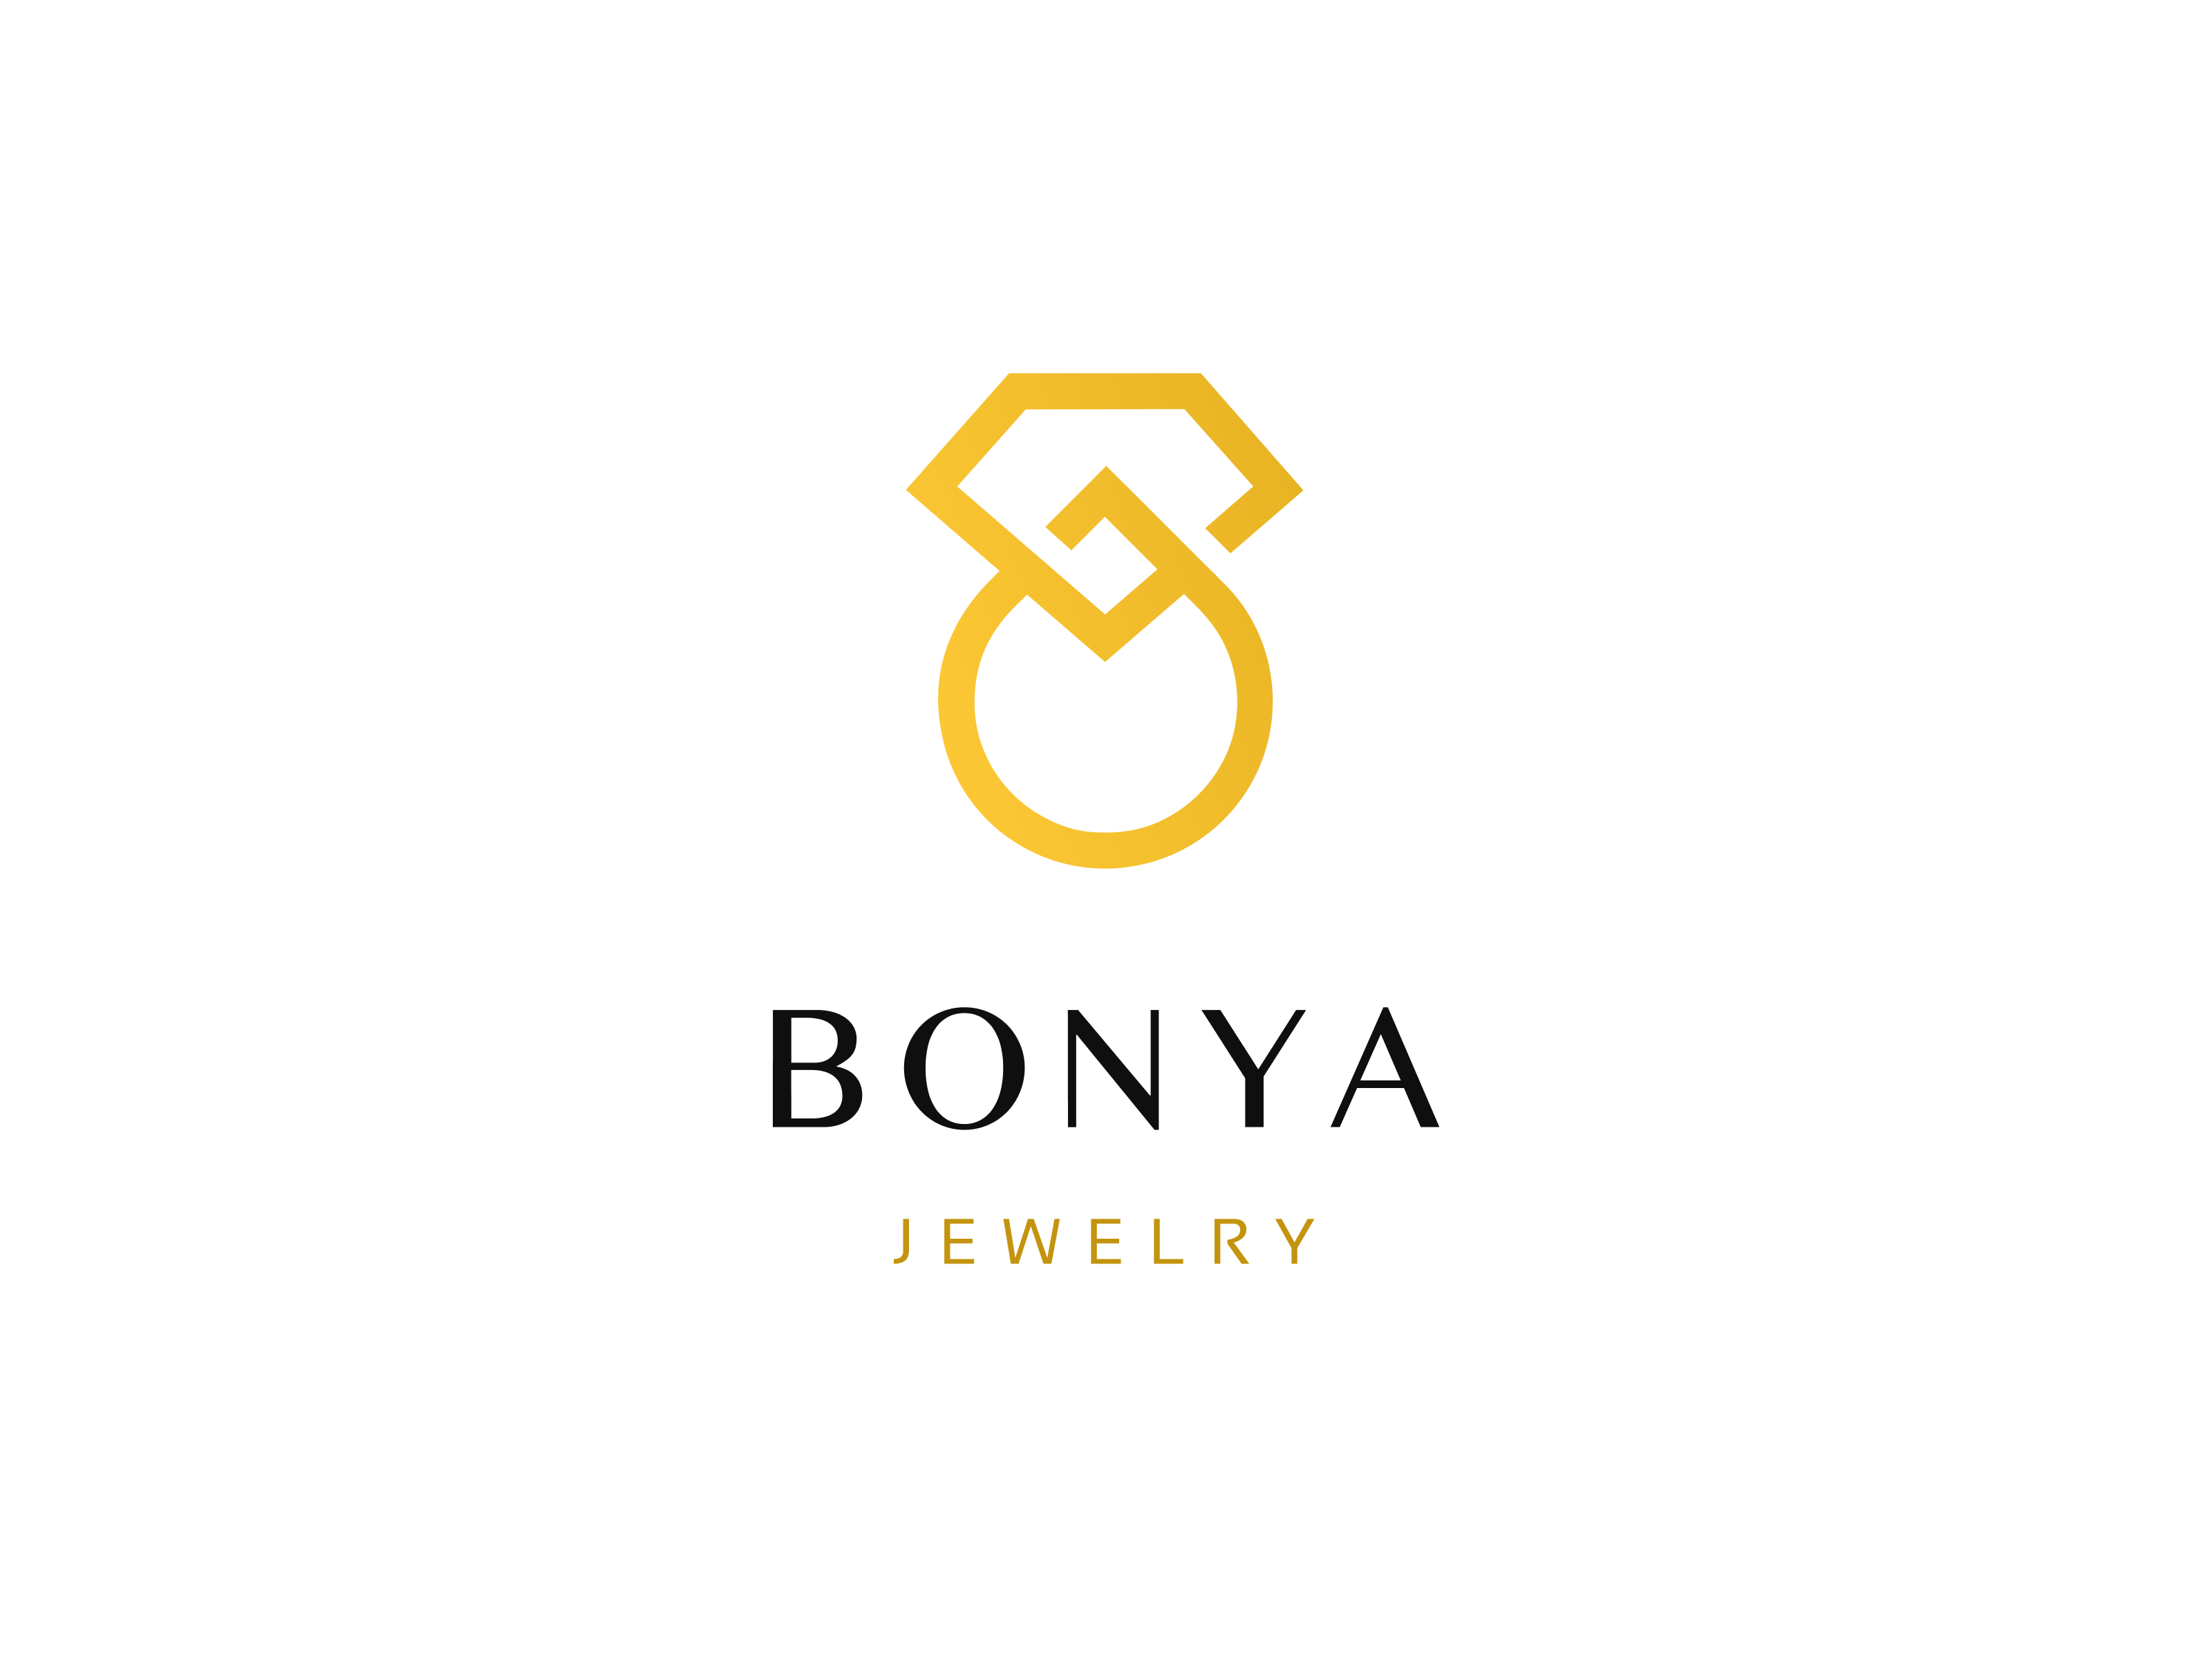 Jewelry logo design h letter Royalty Free Vector Image